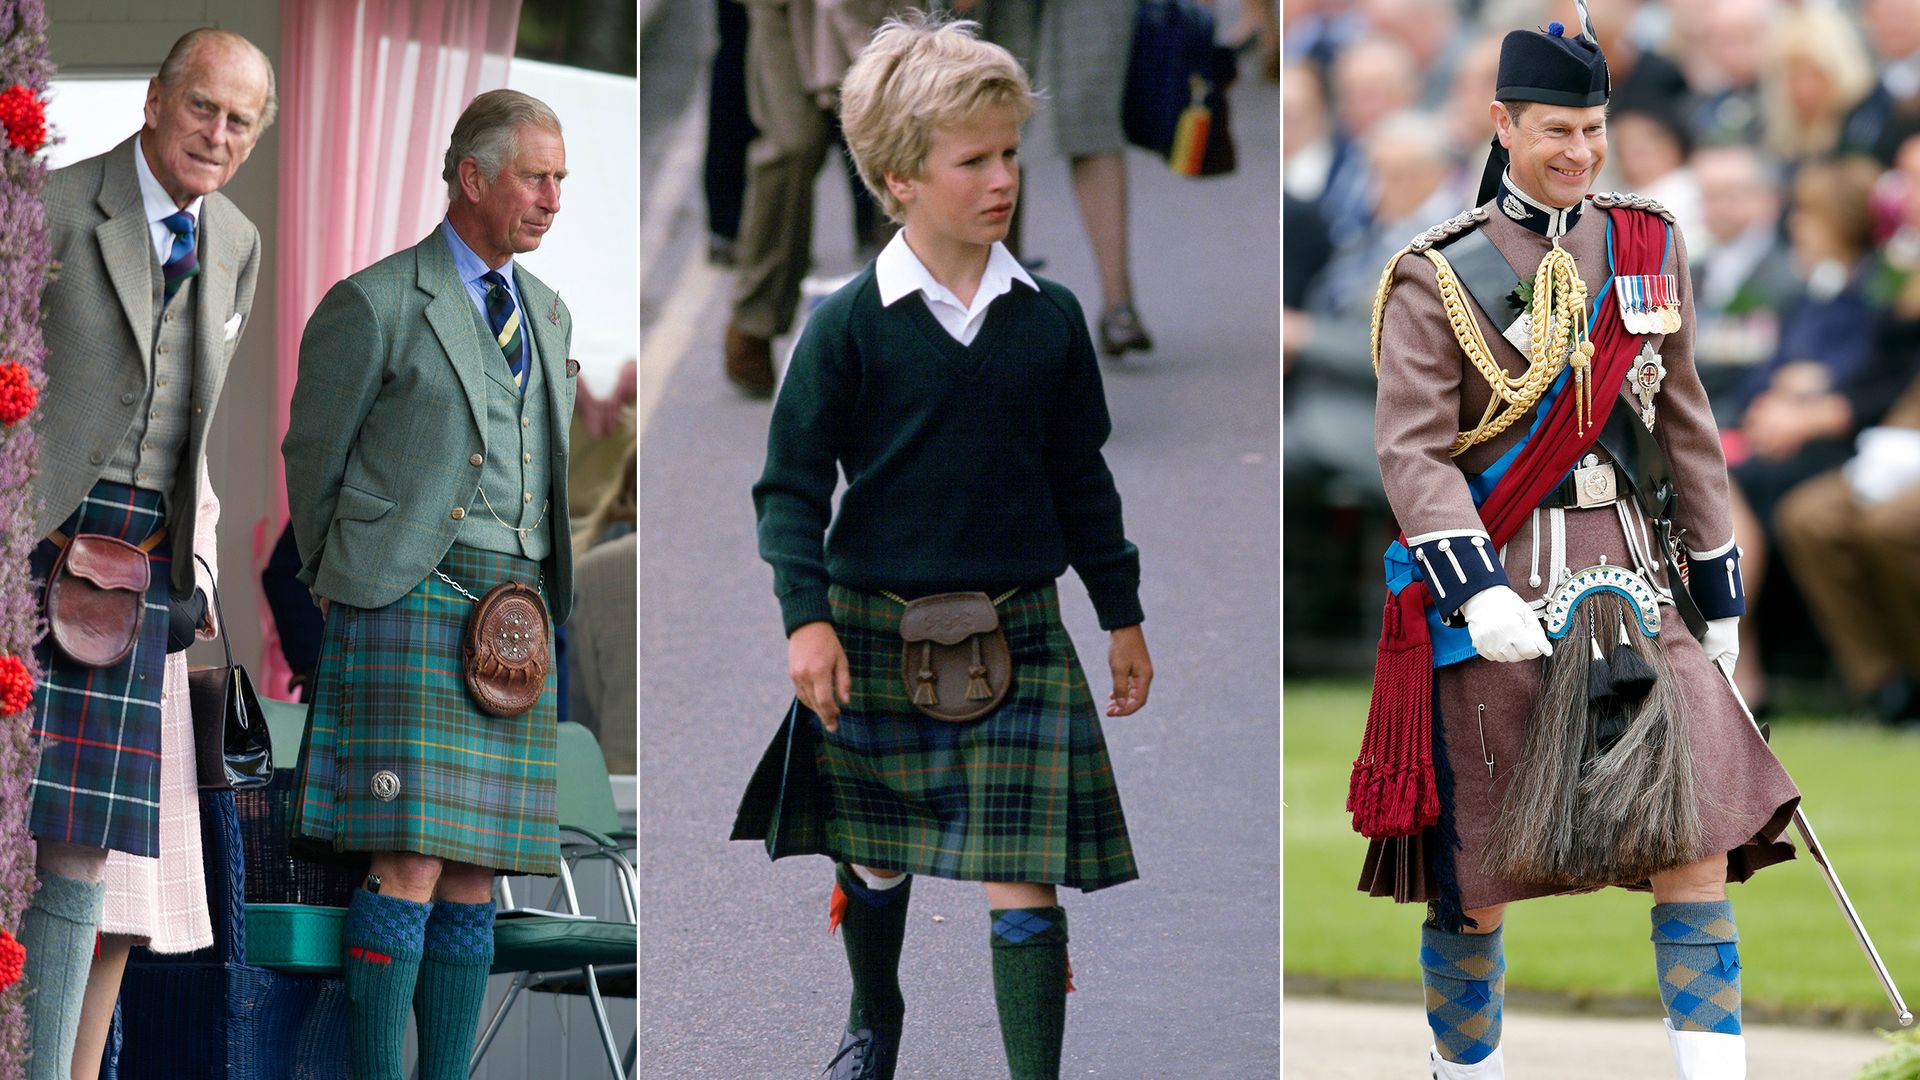 Prince Philip, King Charles, Peter Phillips and Prince Edward wearing kilts